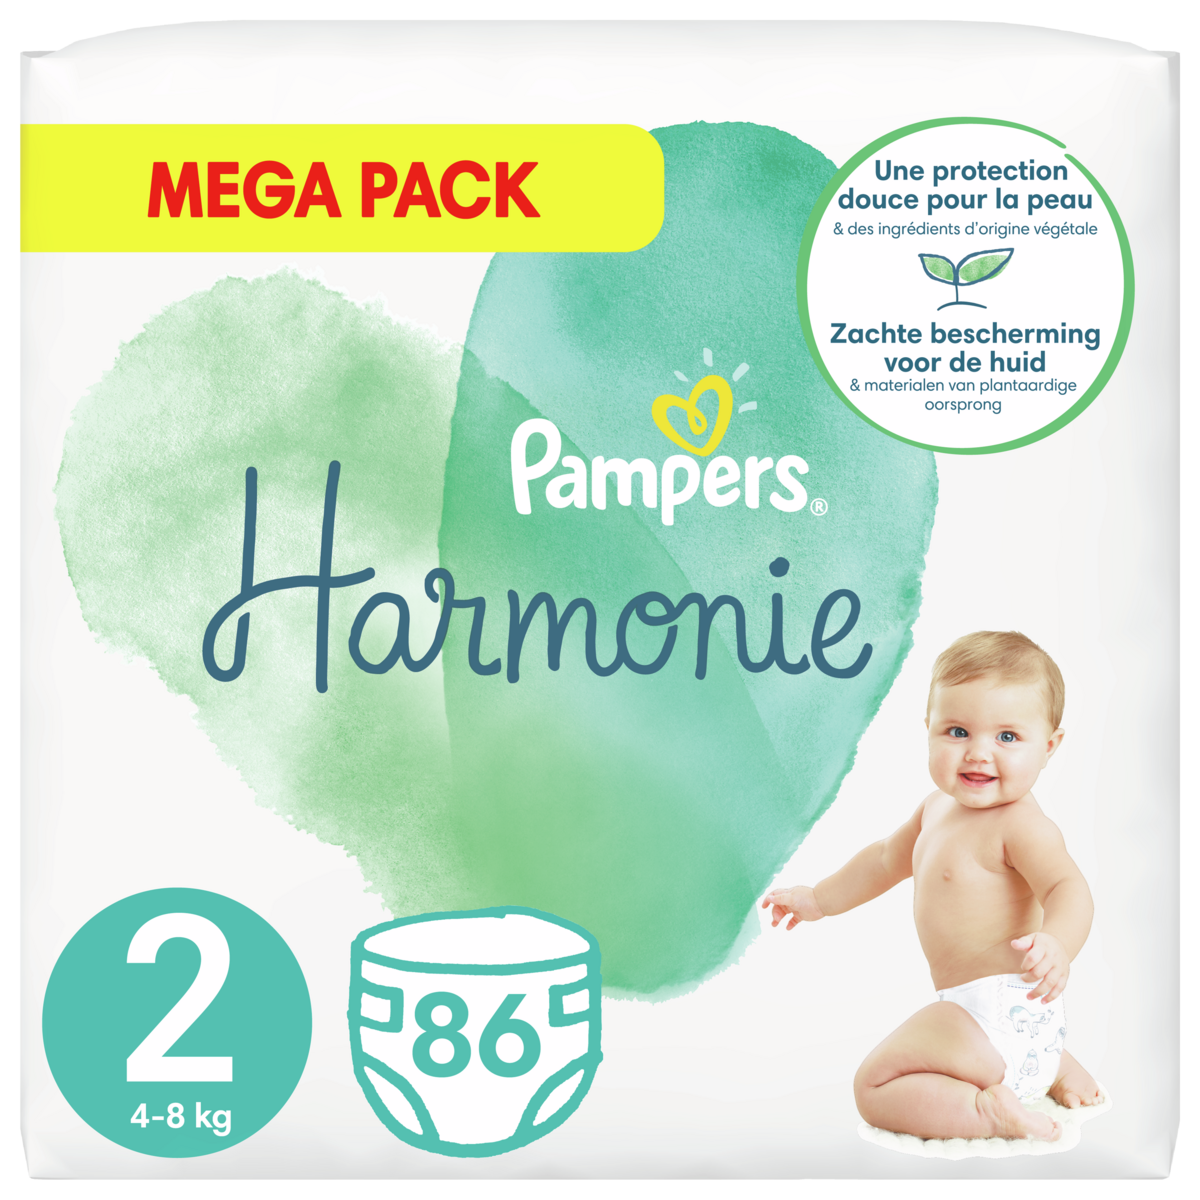 PAMPERS Harmonie taille 2 couches 4 à 8kg 86 Couches pas cher